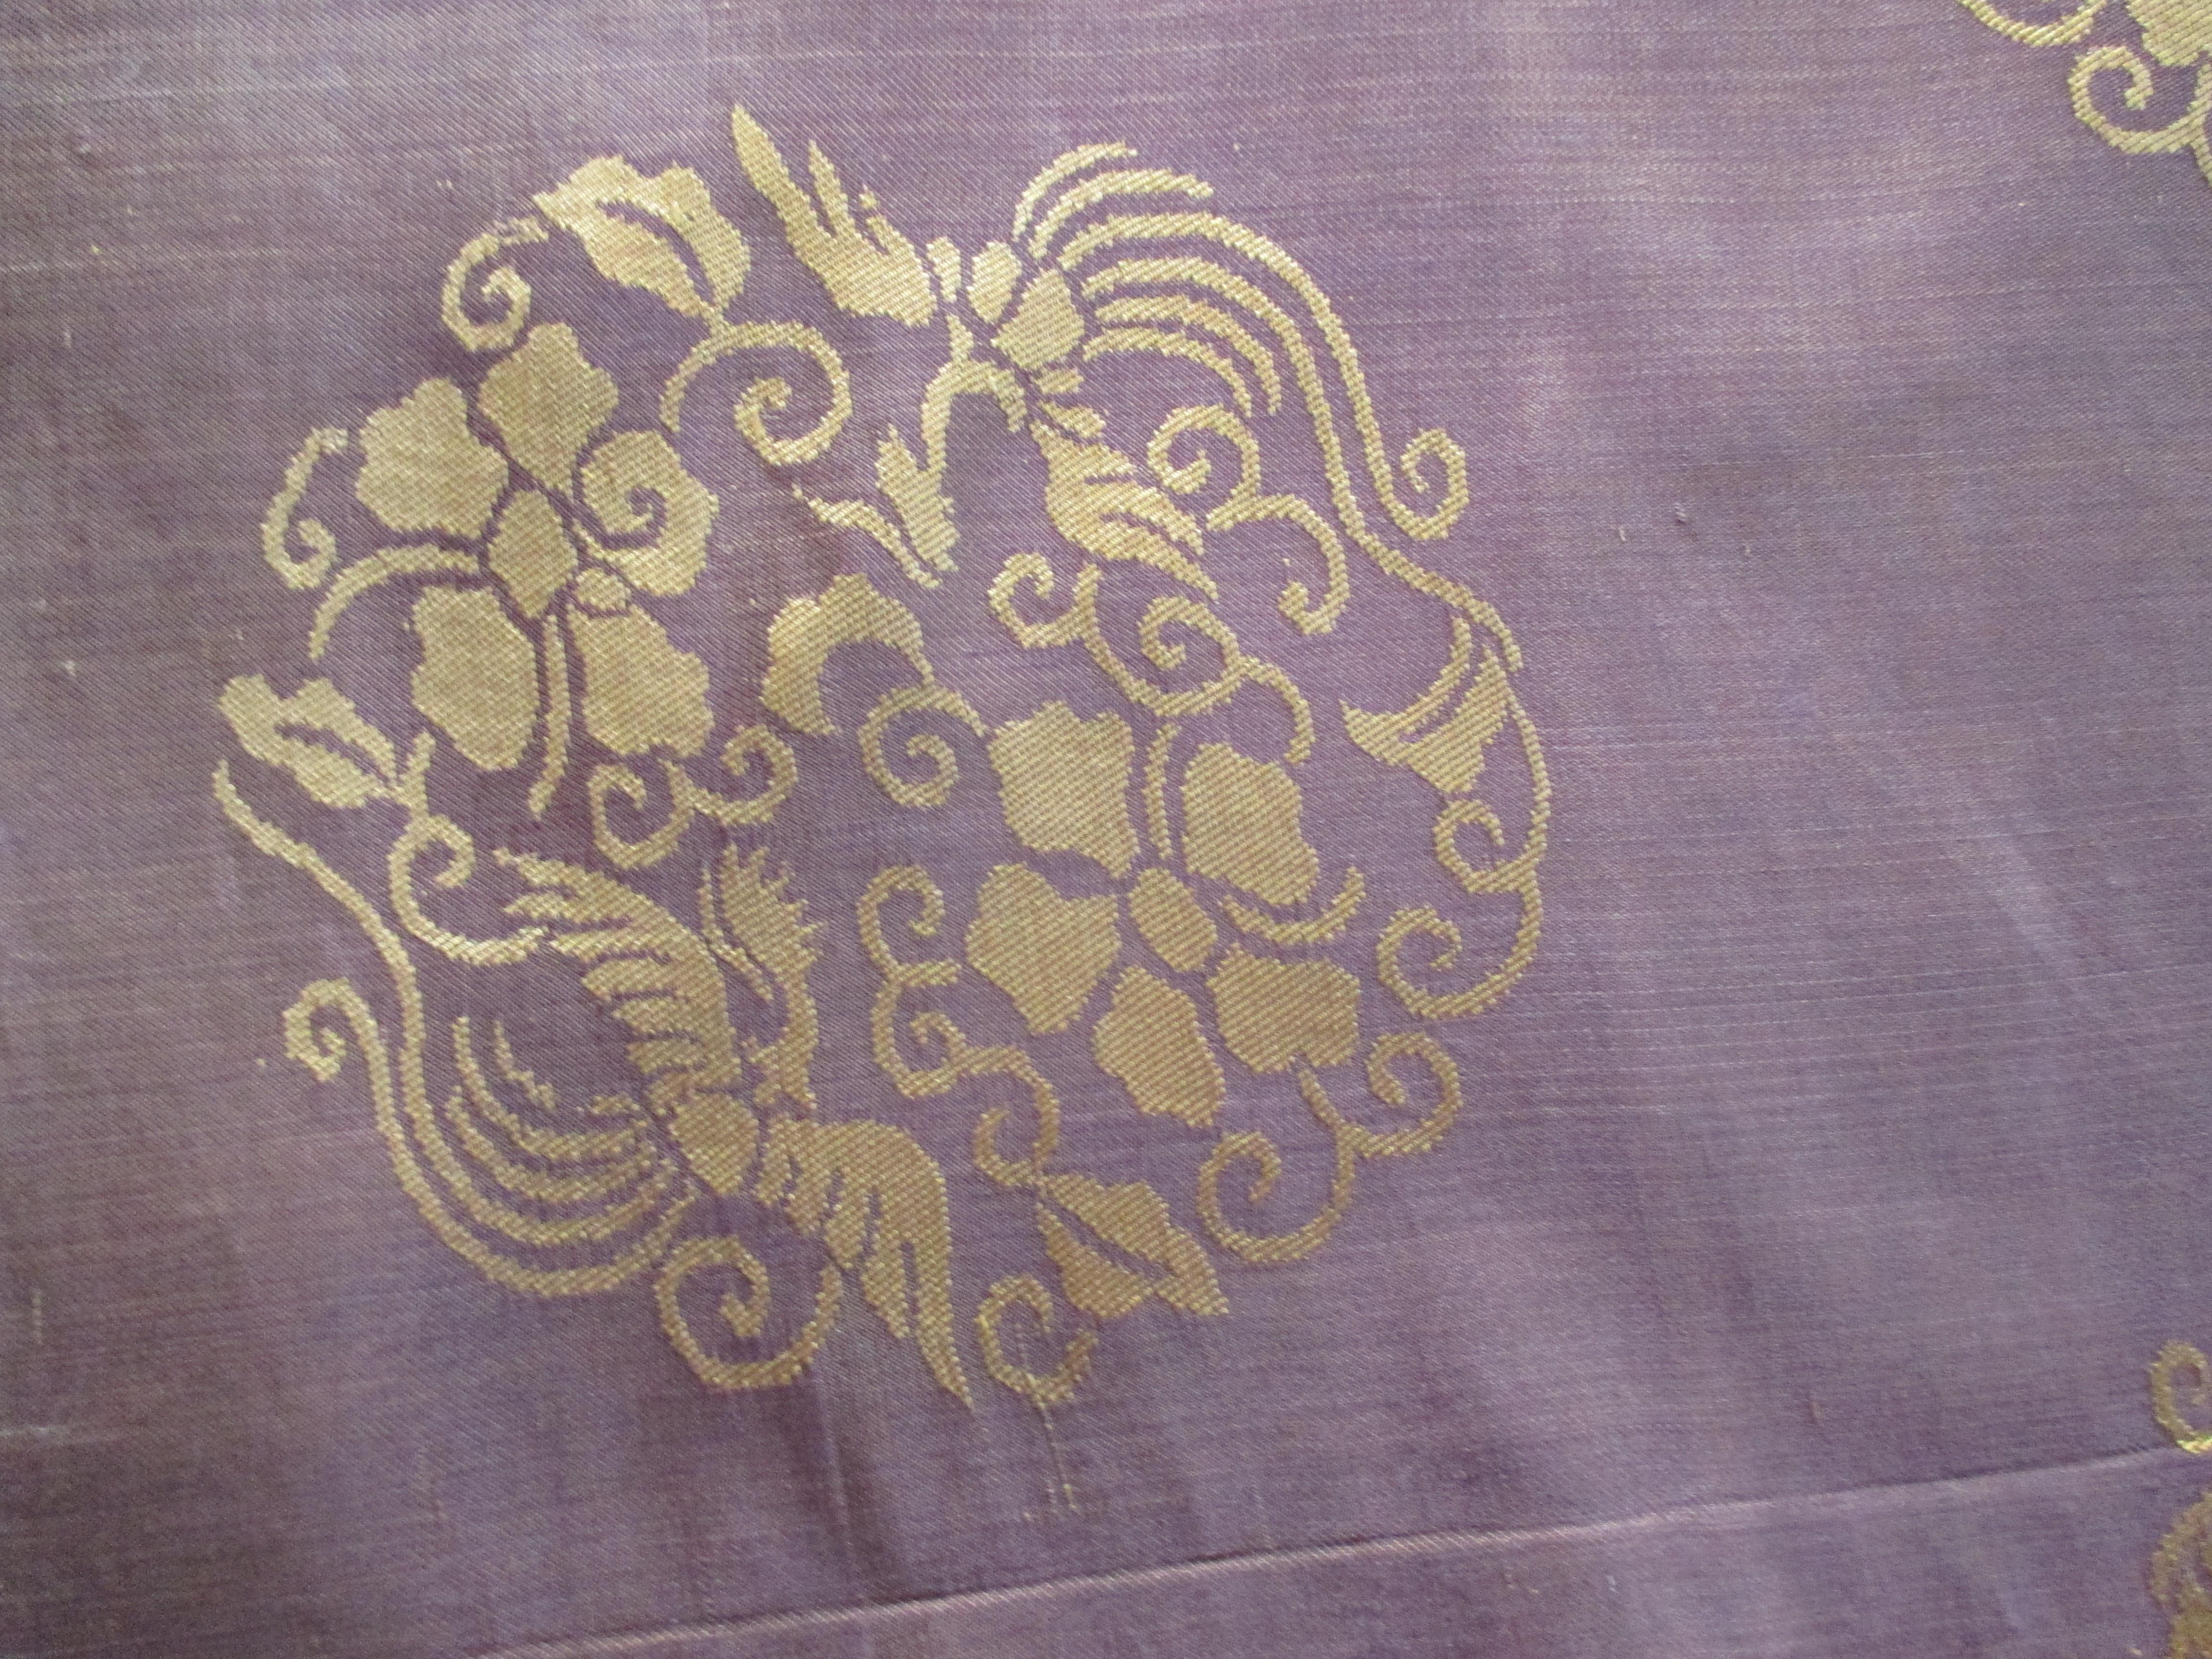 Vintage obi brown and gold silk textile with flowers and birds medallions.
Ideal for pillows.
Sold as is.
Size: 16.5